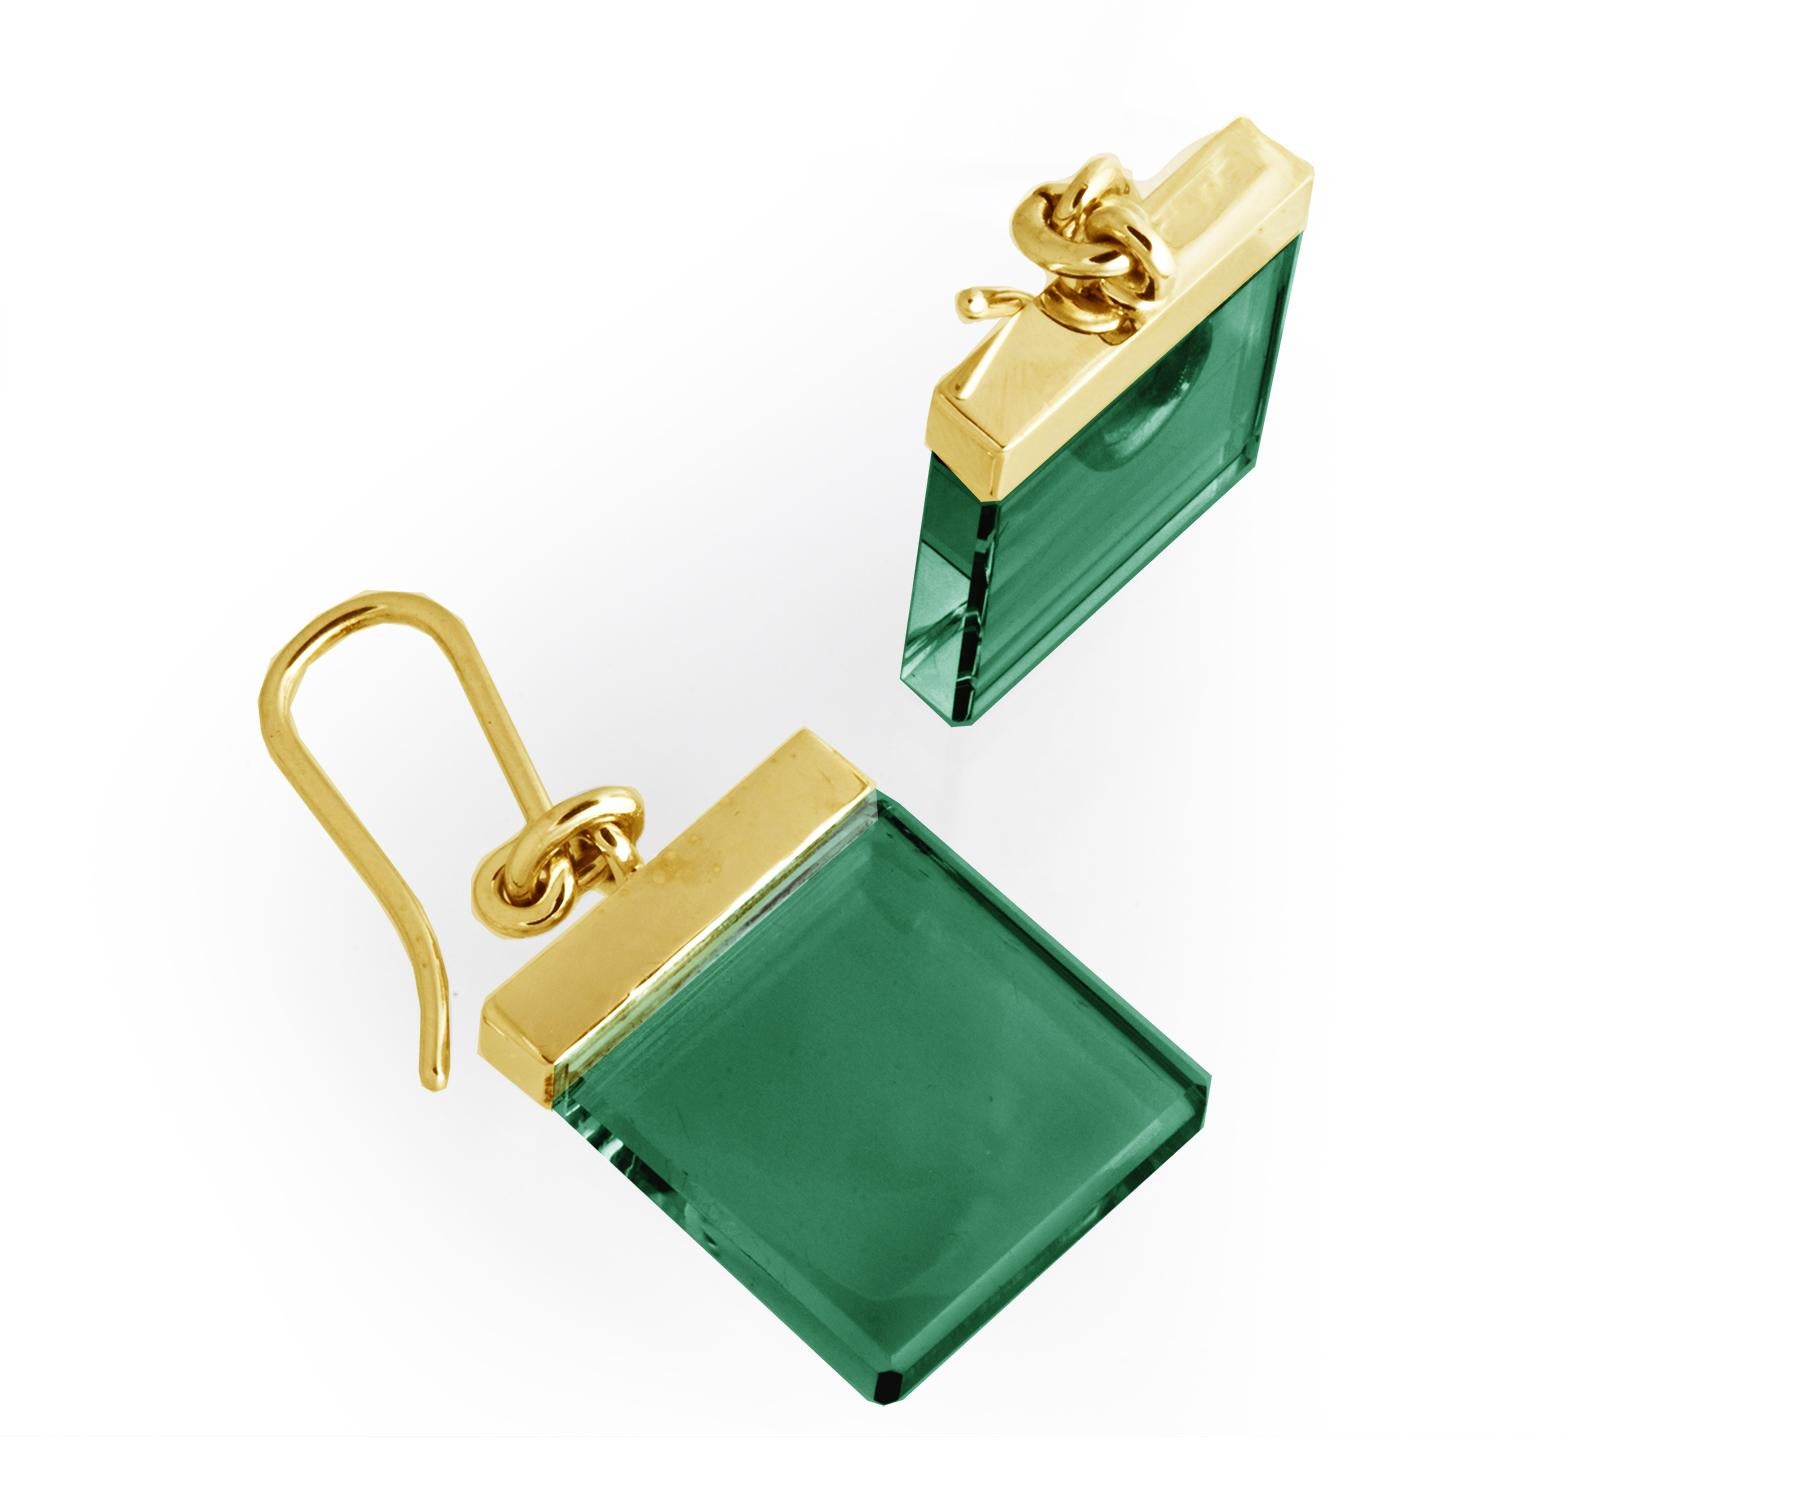 These fashion earrings belong to the Ink collection, a contemporary jewelry line designed by the Berlin-based oil painter Polya Medvedeva. They are crafted from 14 karat yellow gold and feature 15x15x3 mm green grown quartzes, which are cut in a way